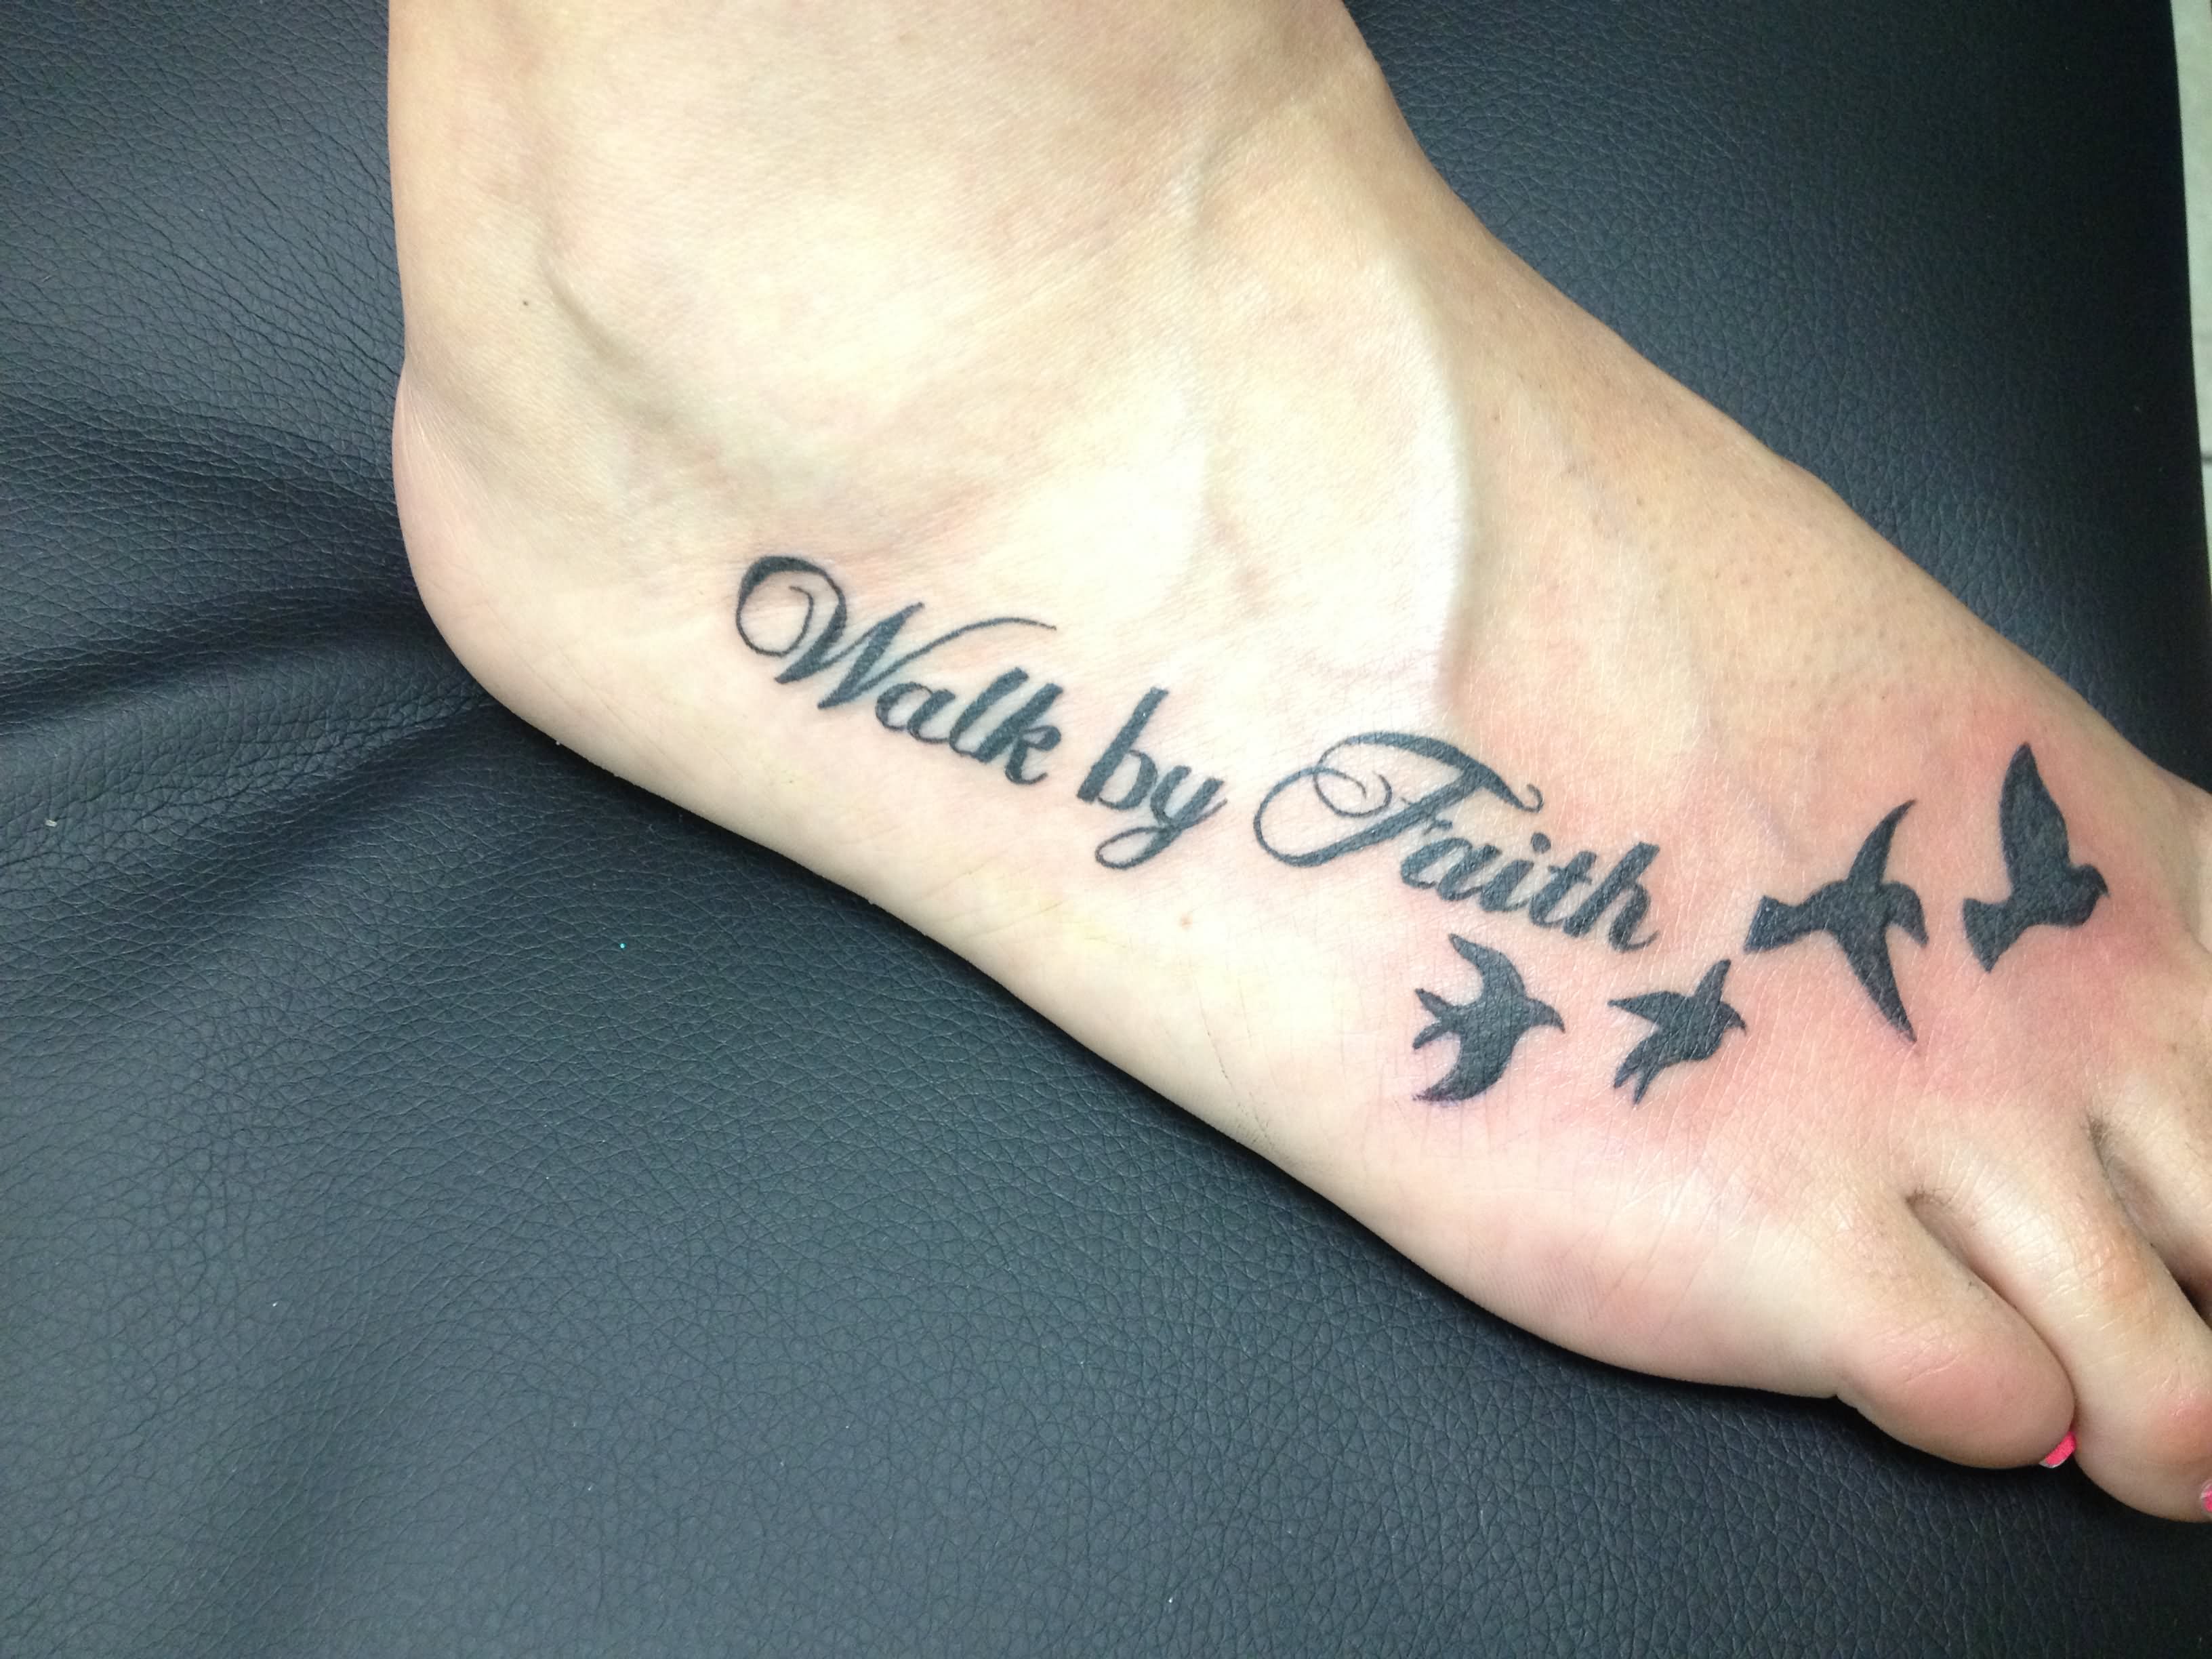 Black Walk By Faith With Flying Birds Tattoo On Foot